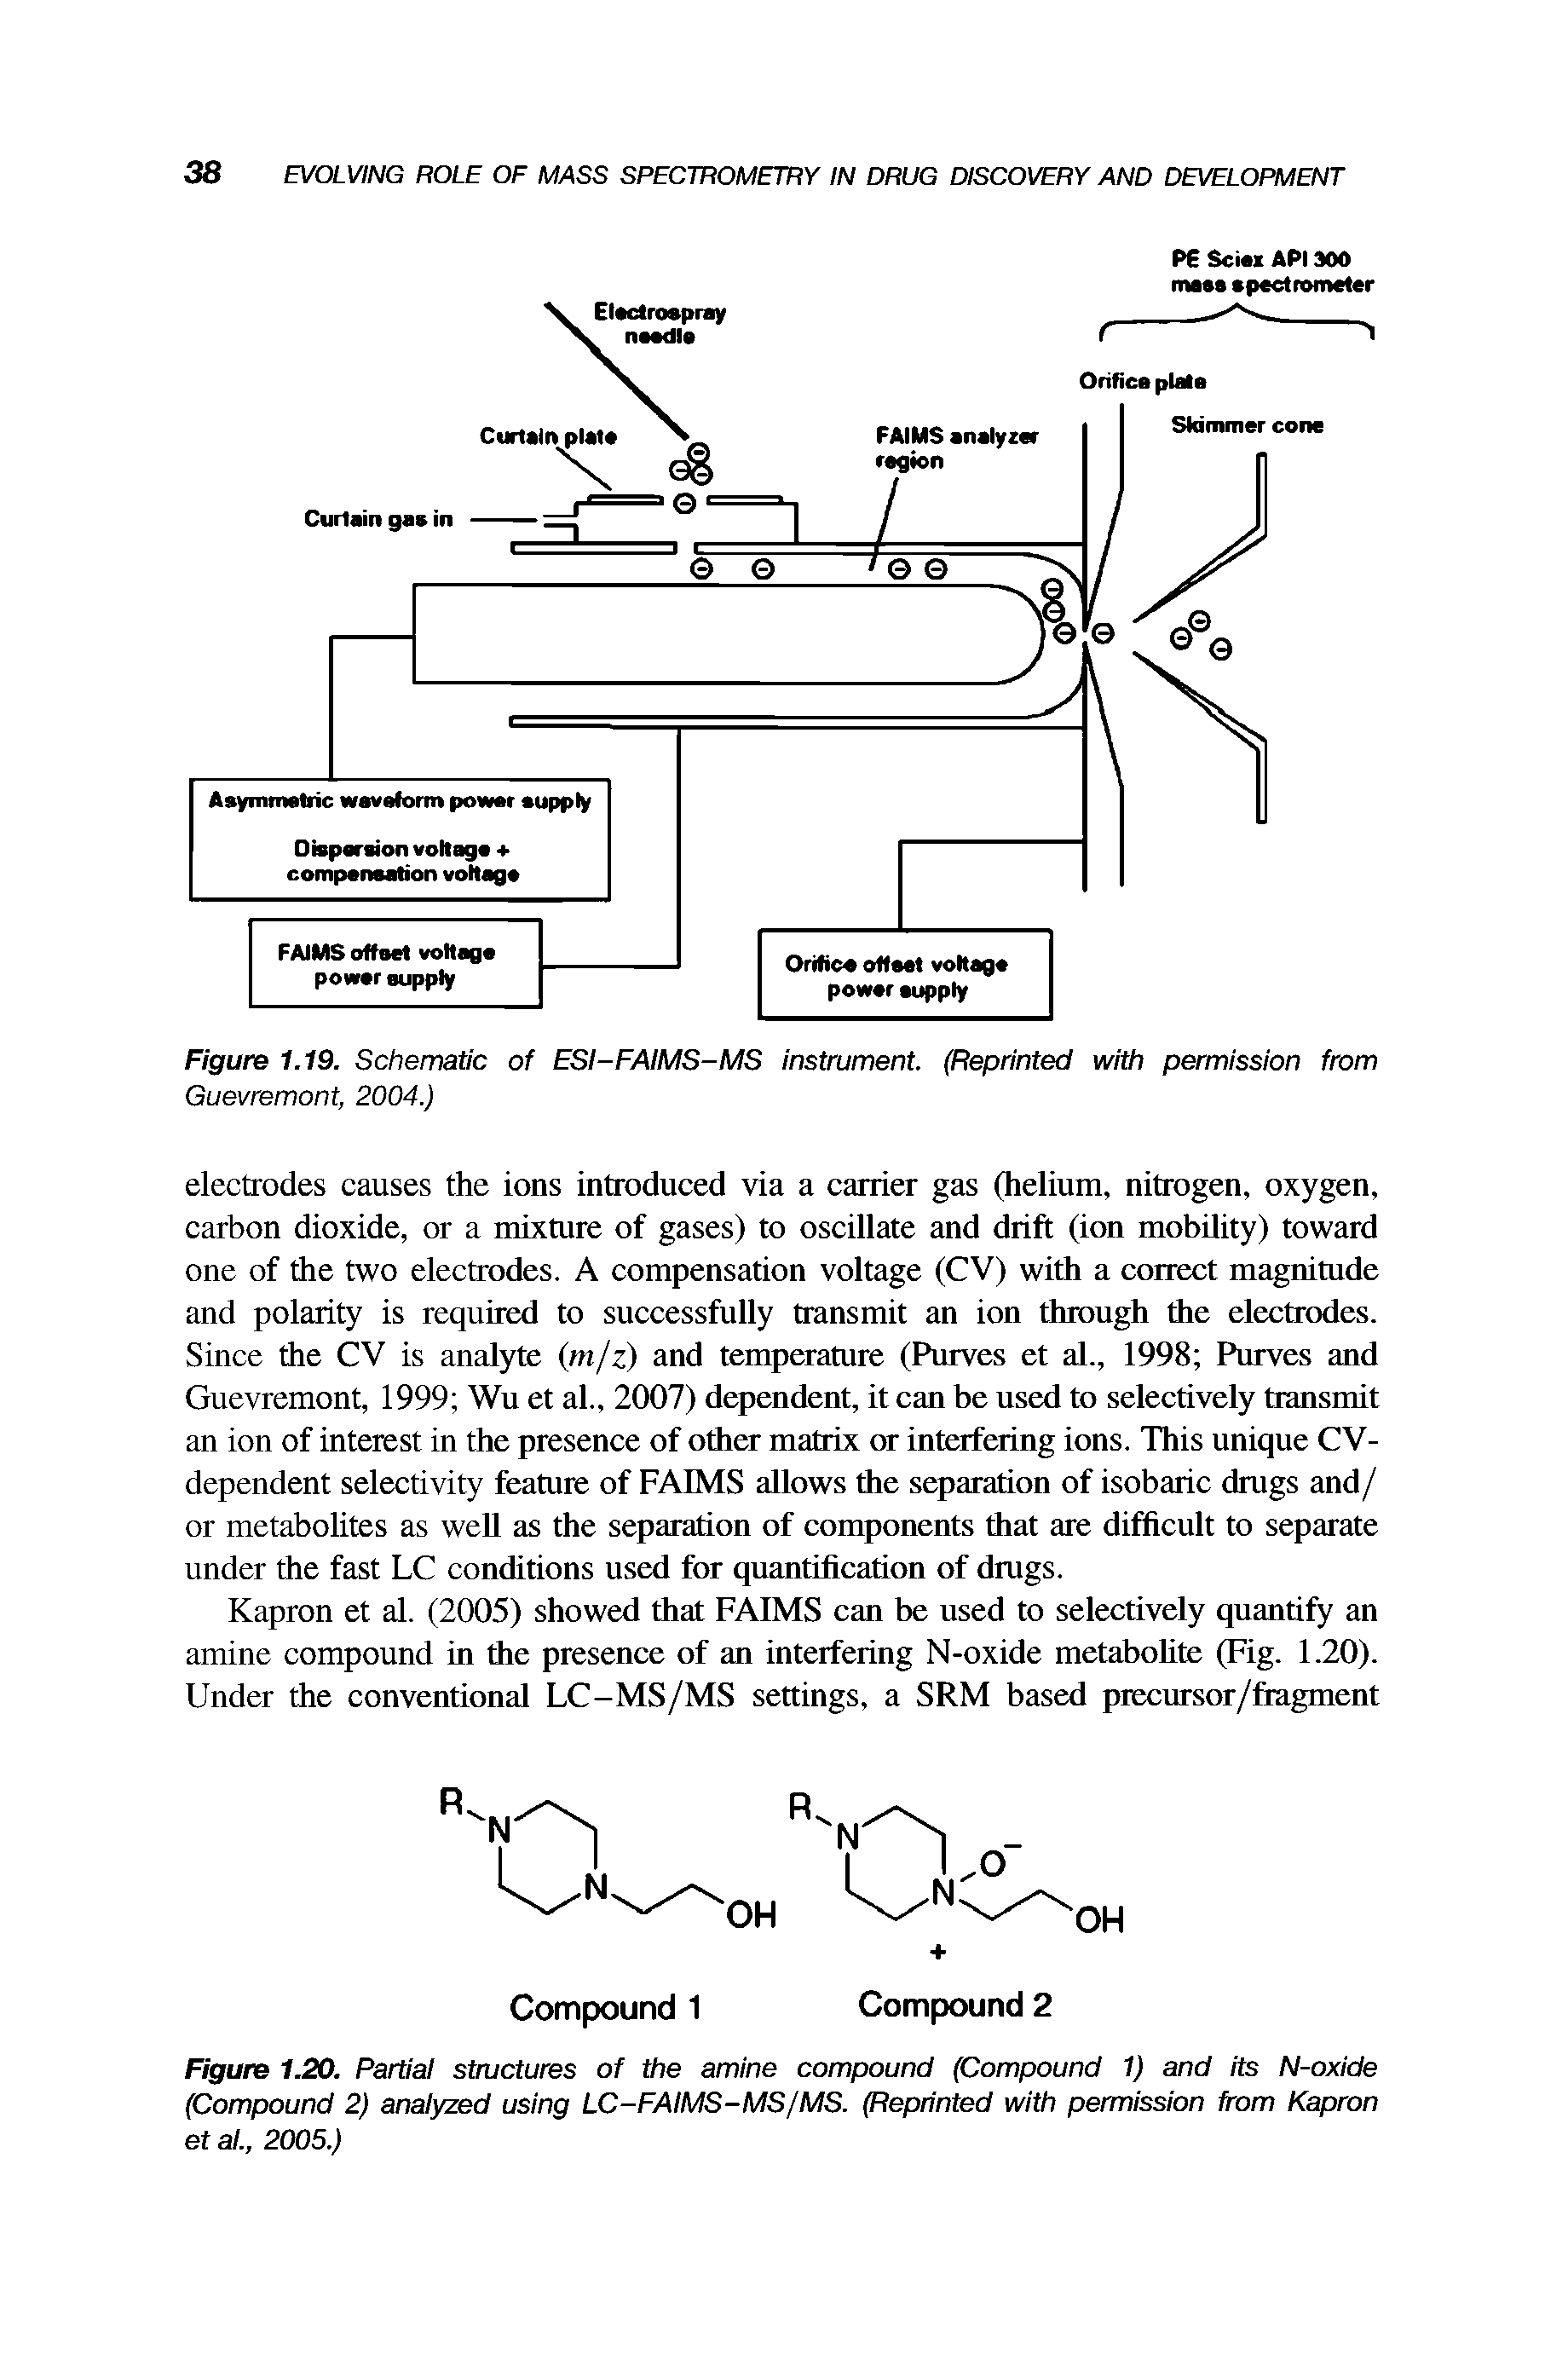 Figure 1.20. Partial stmetures of the amine compound (Compound 1) and its N-oxide (Compound 2) analyzed using LC-FAIMS-MS/MS. (Reprinted with permission from Kapron et al., 2005.)...